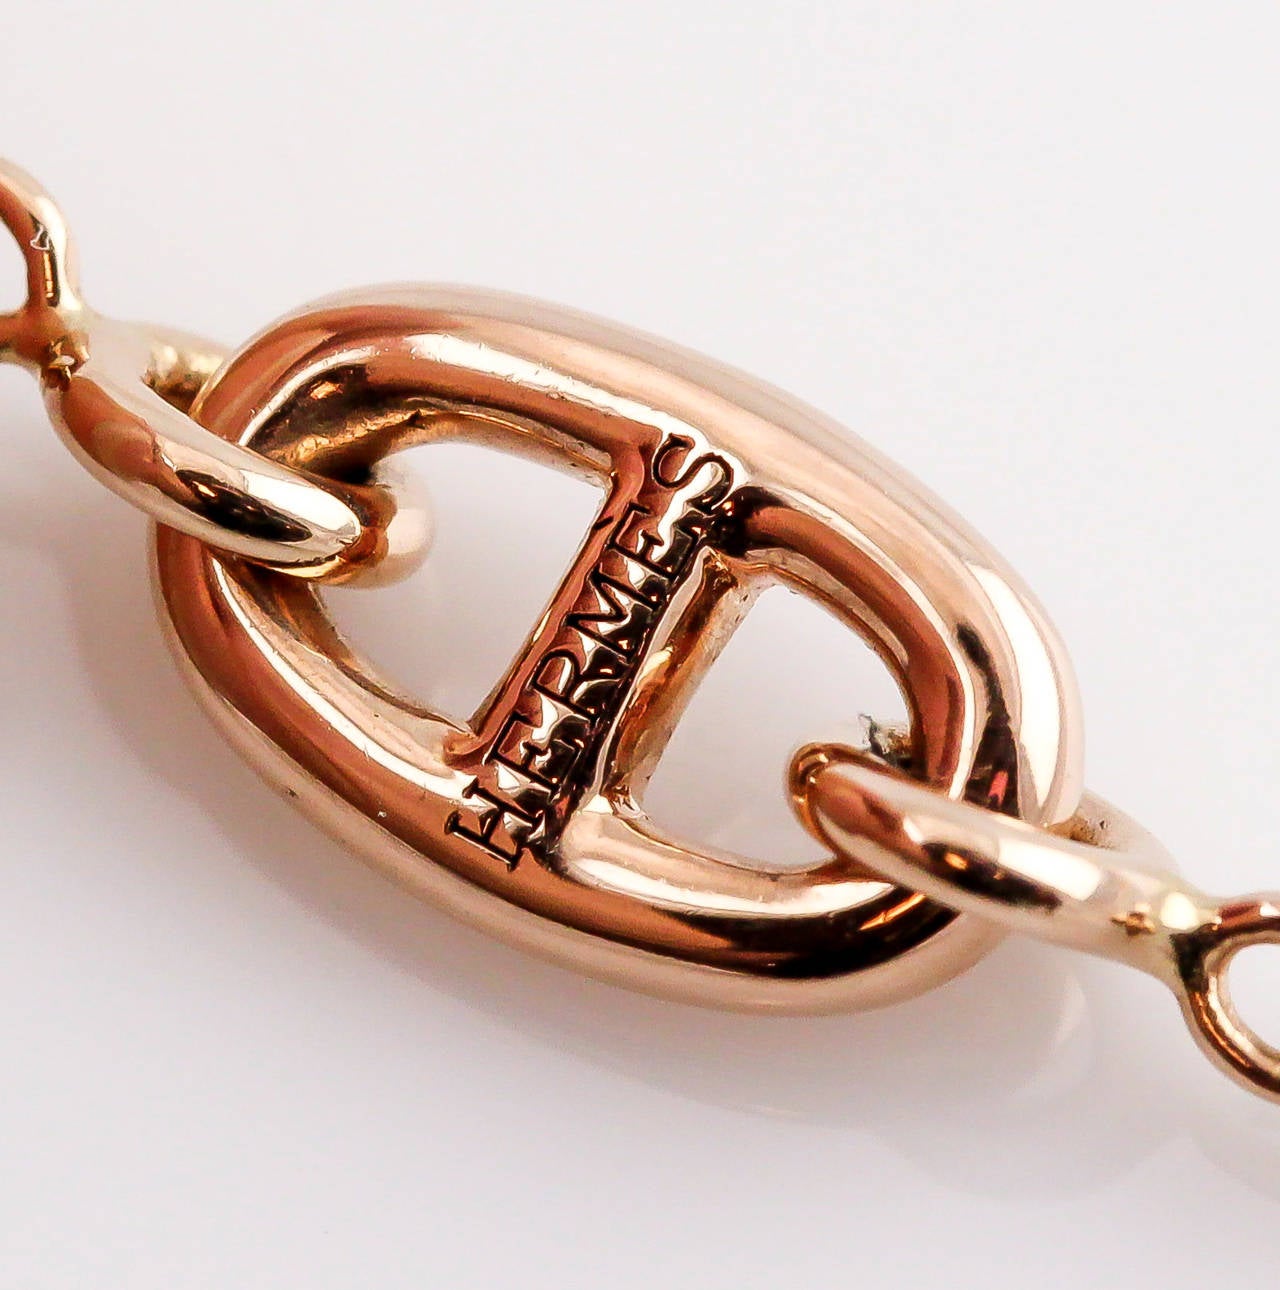 Stylish 18K pink gold long chain necklace from the 